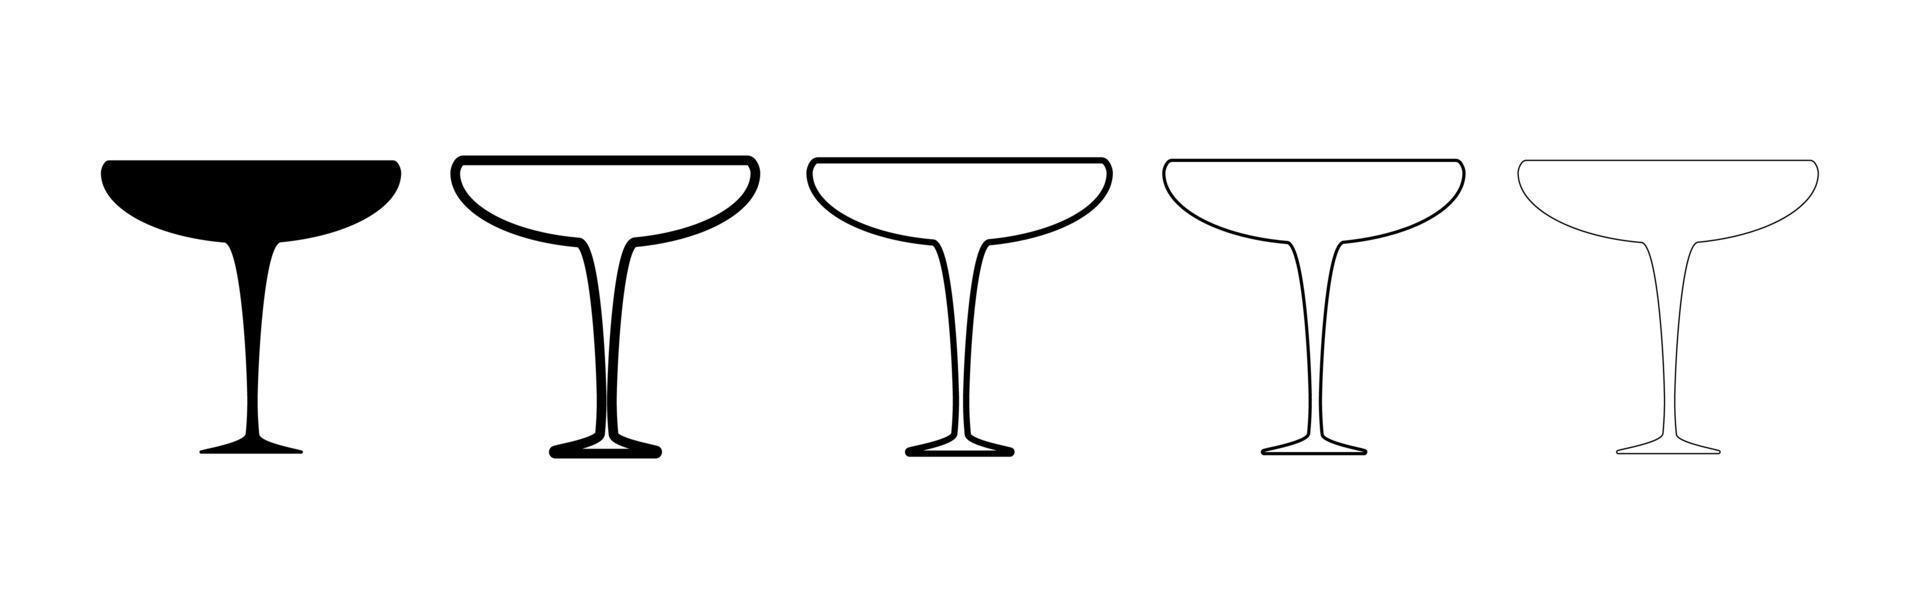 Wine and martini glasses silhouette set. Different thickness glasses. Glass in black color isolated on white background. Silhouette martini glass icon set. Modern line art design. vector